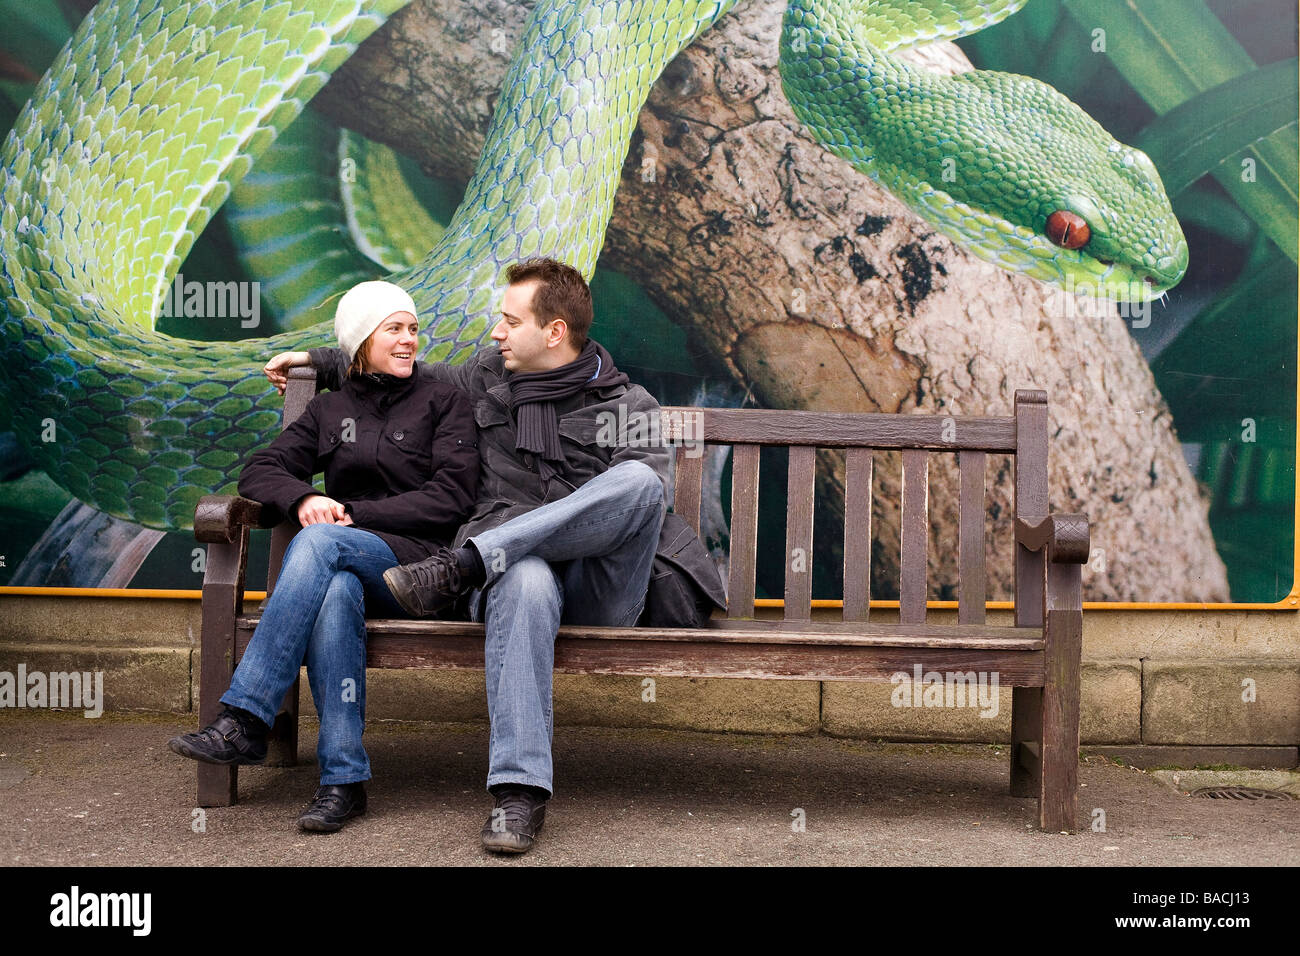 United Kingdom, London, Regent's Park, zoo, couple in front of the reptiles house Stock Photo